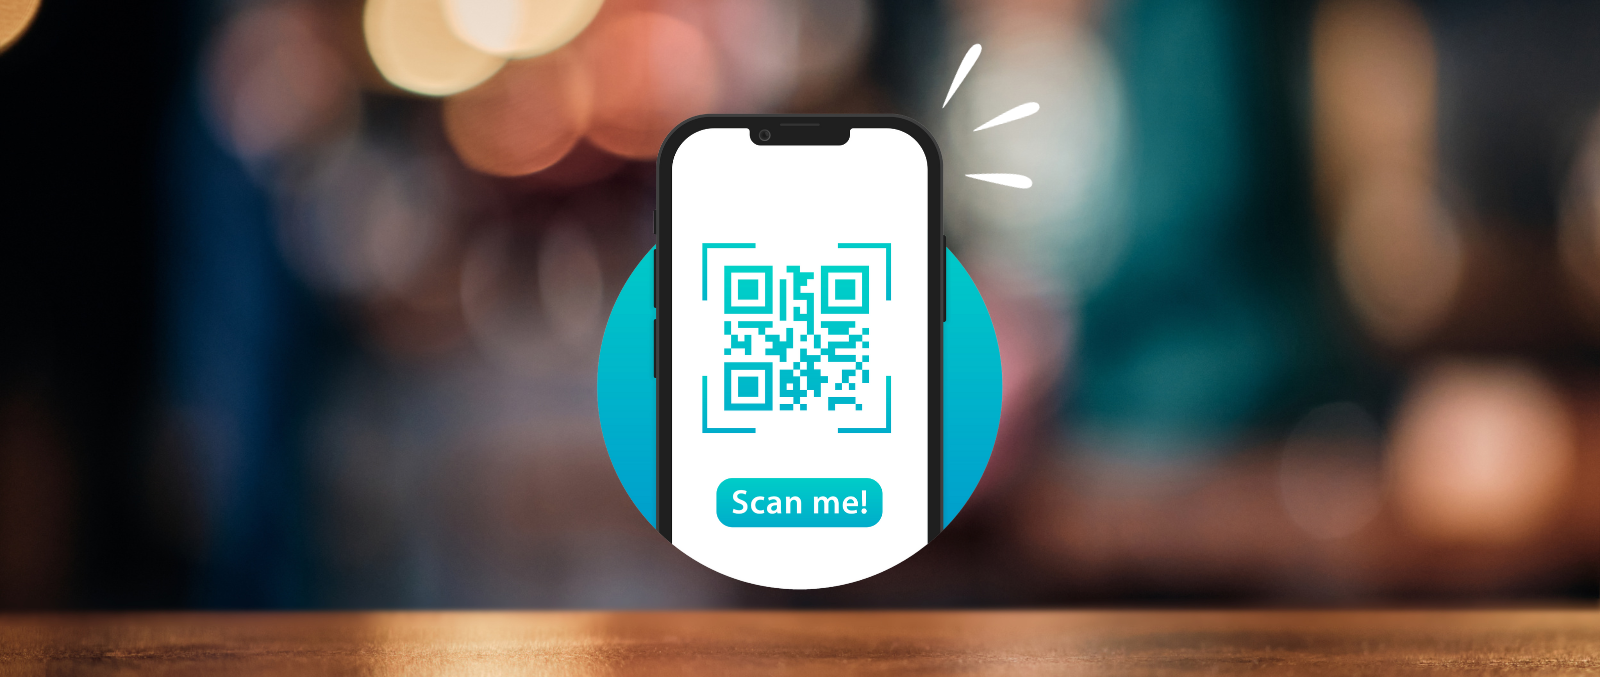 QR Codes Can Hide Risky Links